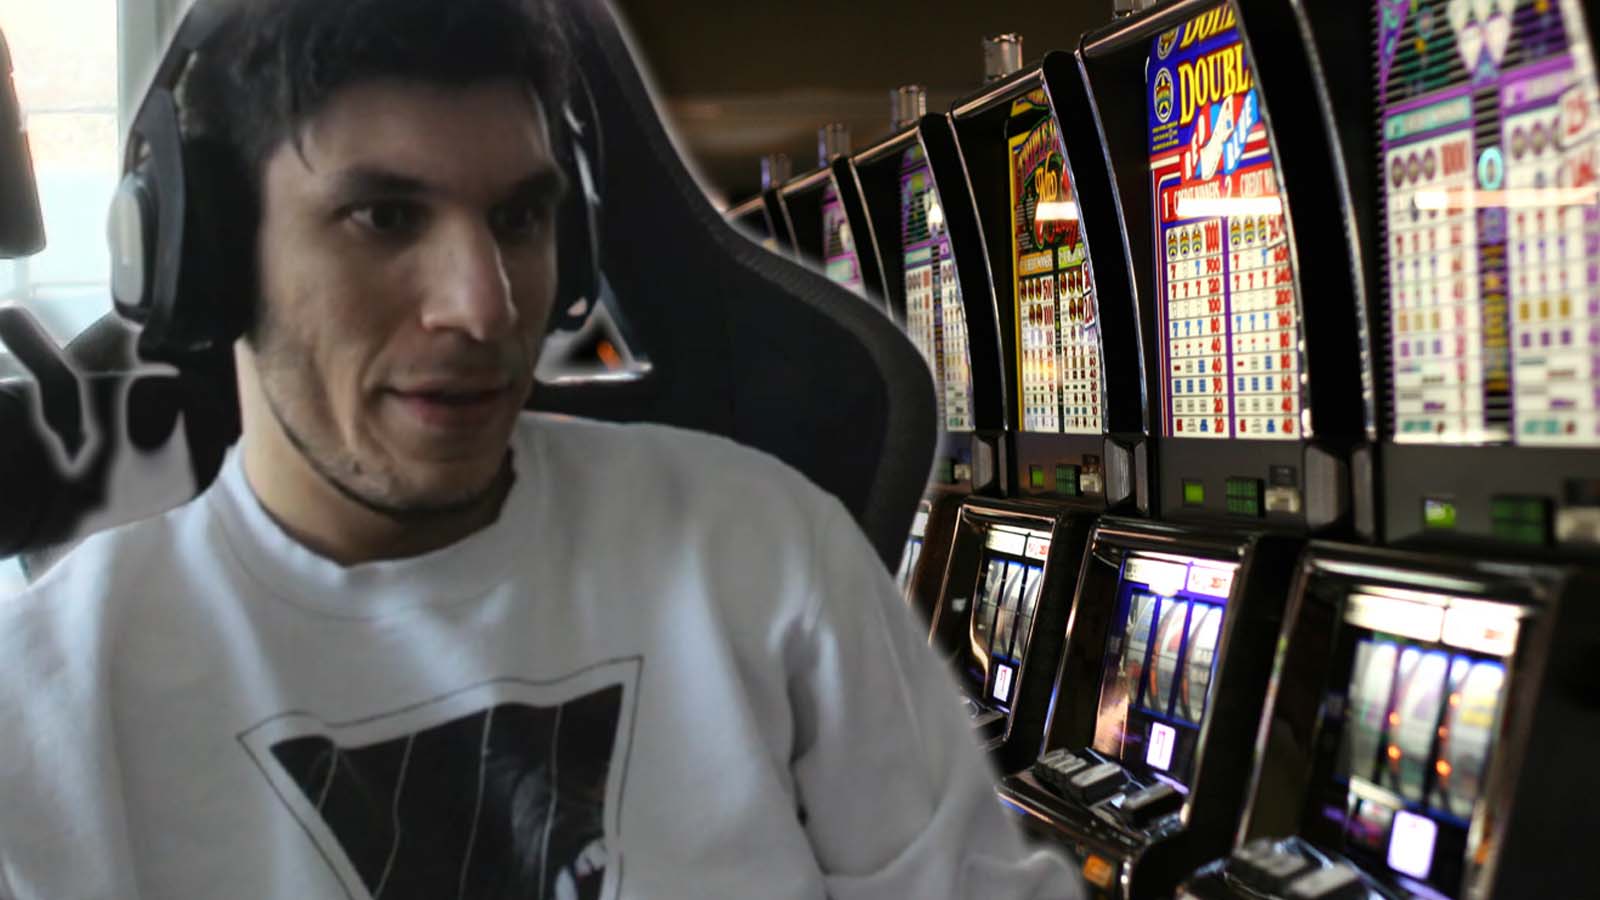 Streamer Trainwrecks says he was paid $360 MILLION for 16 Months of gambling on Twitch